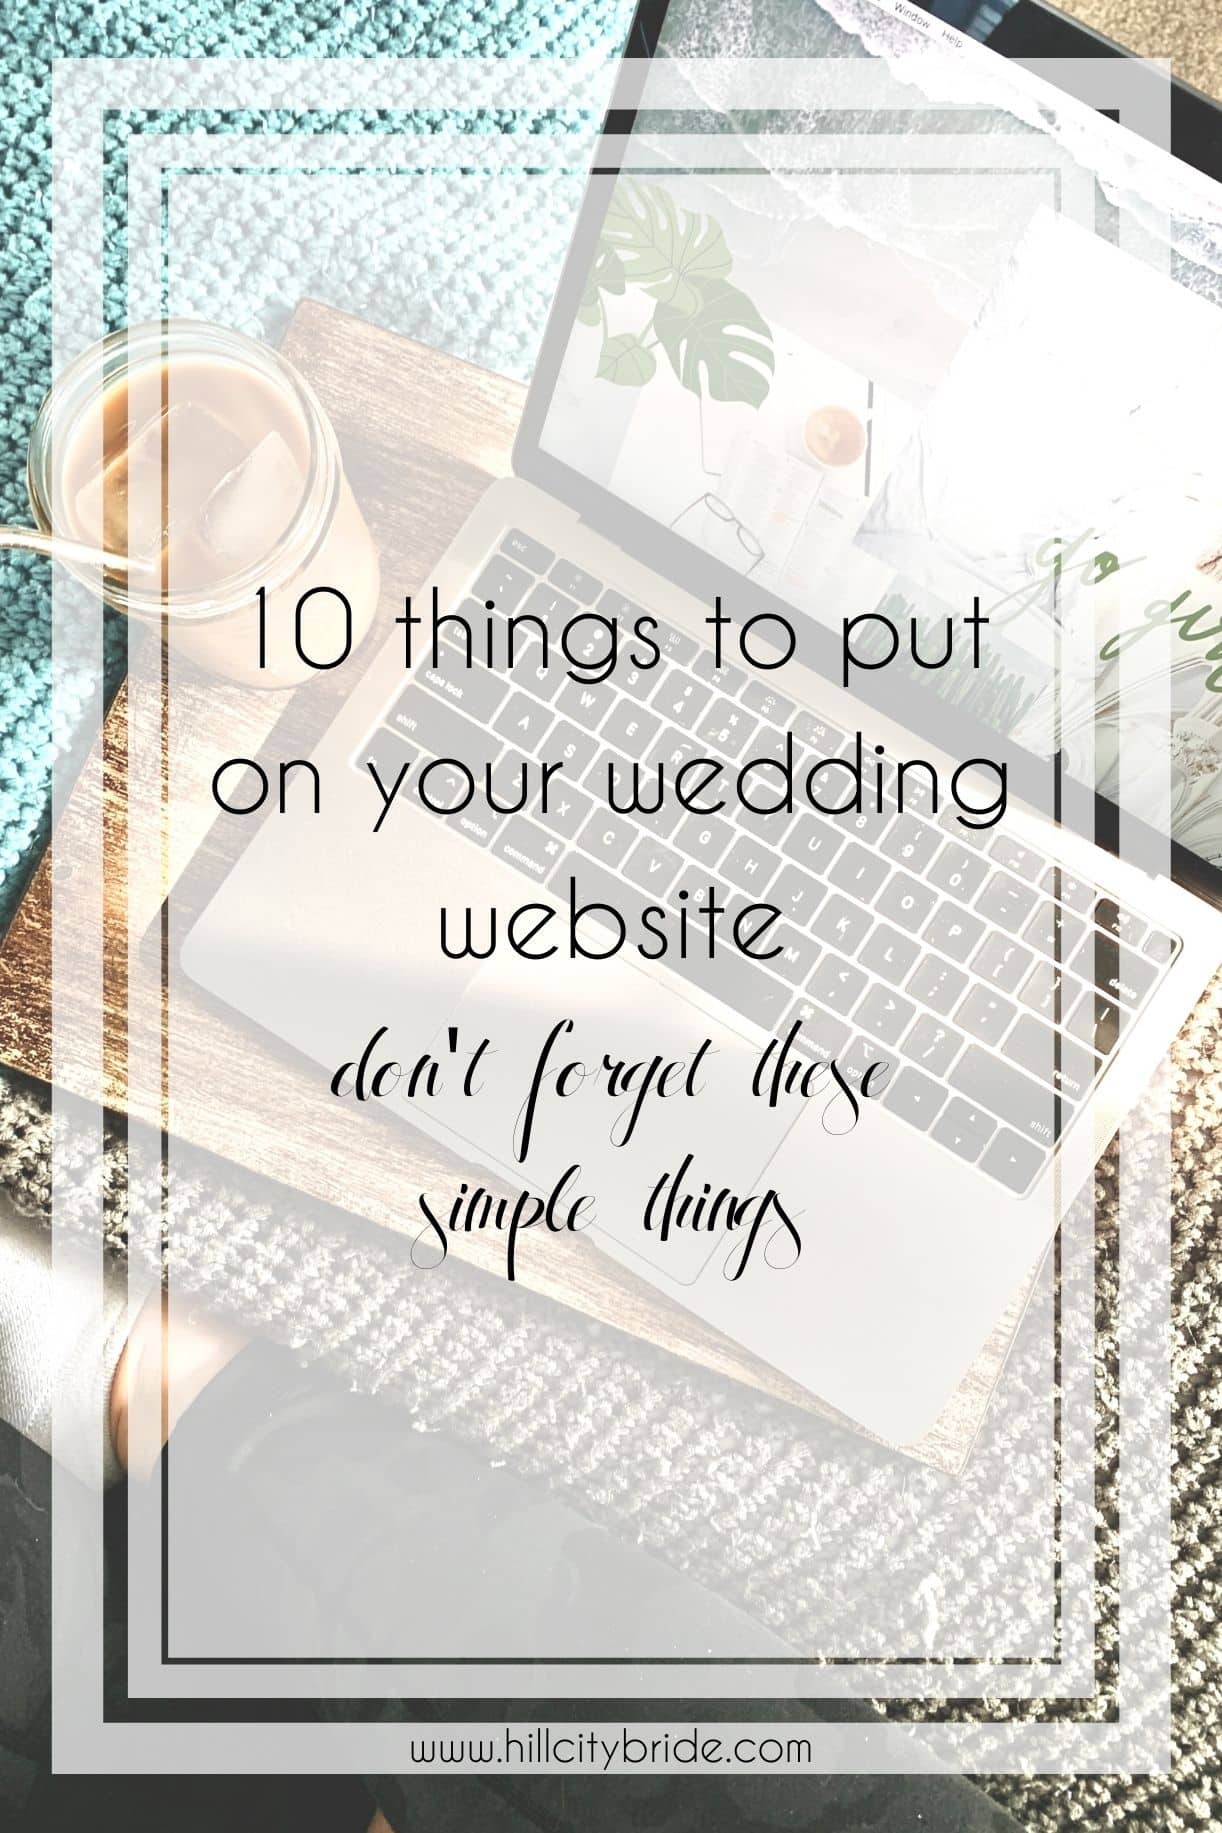 10 Simple Wedding Website Details You Can't Forget to Include